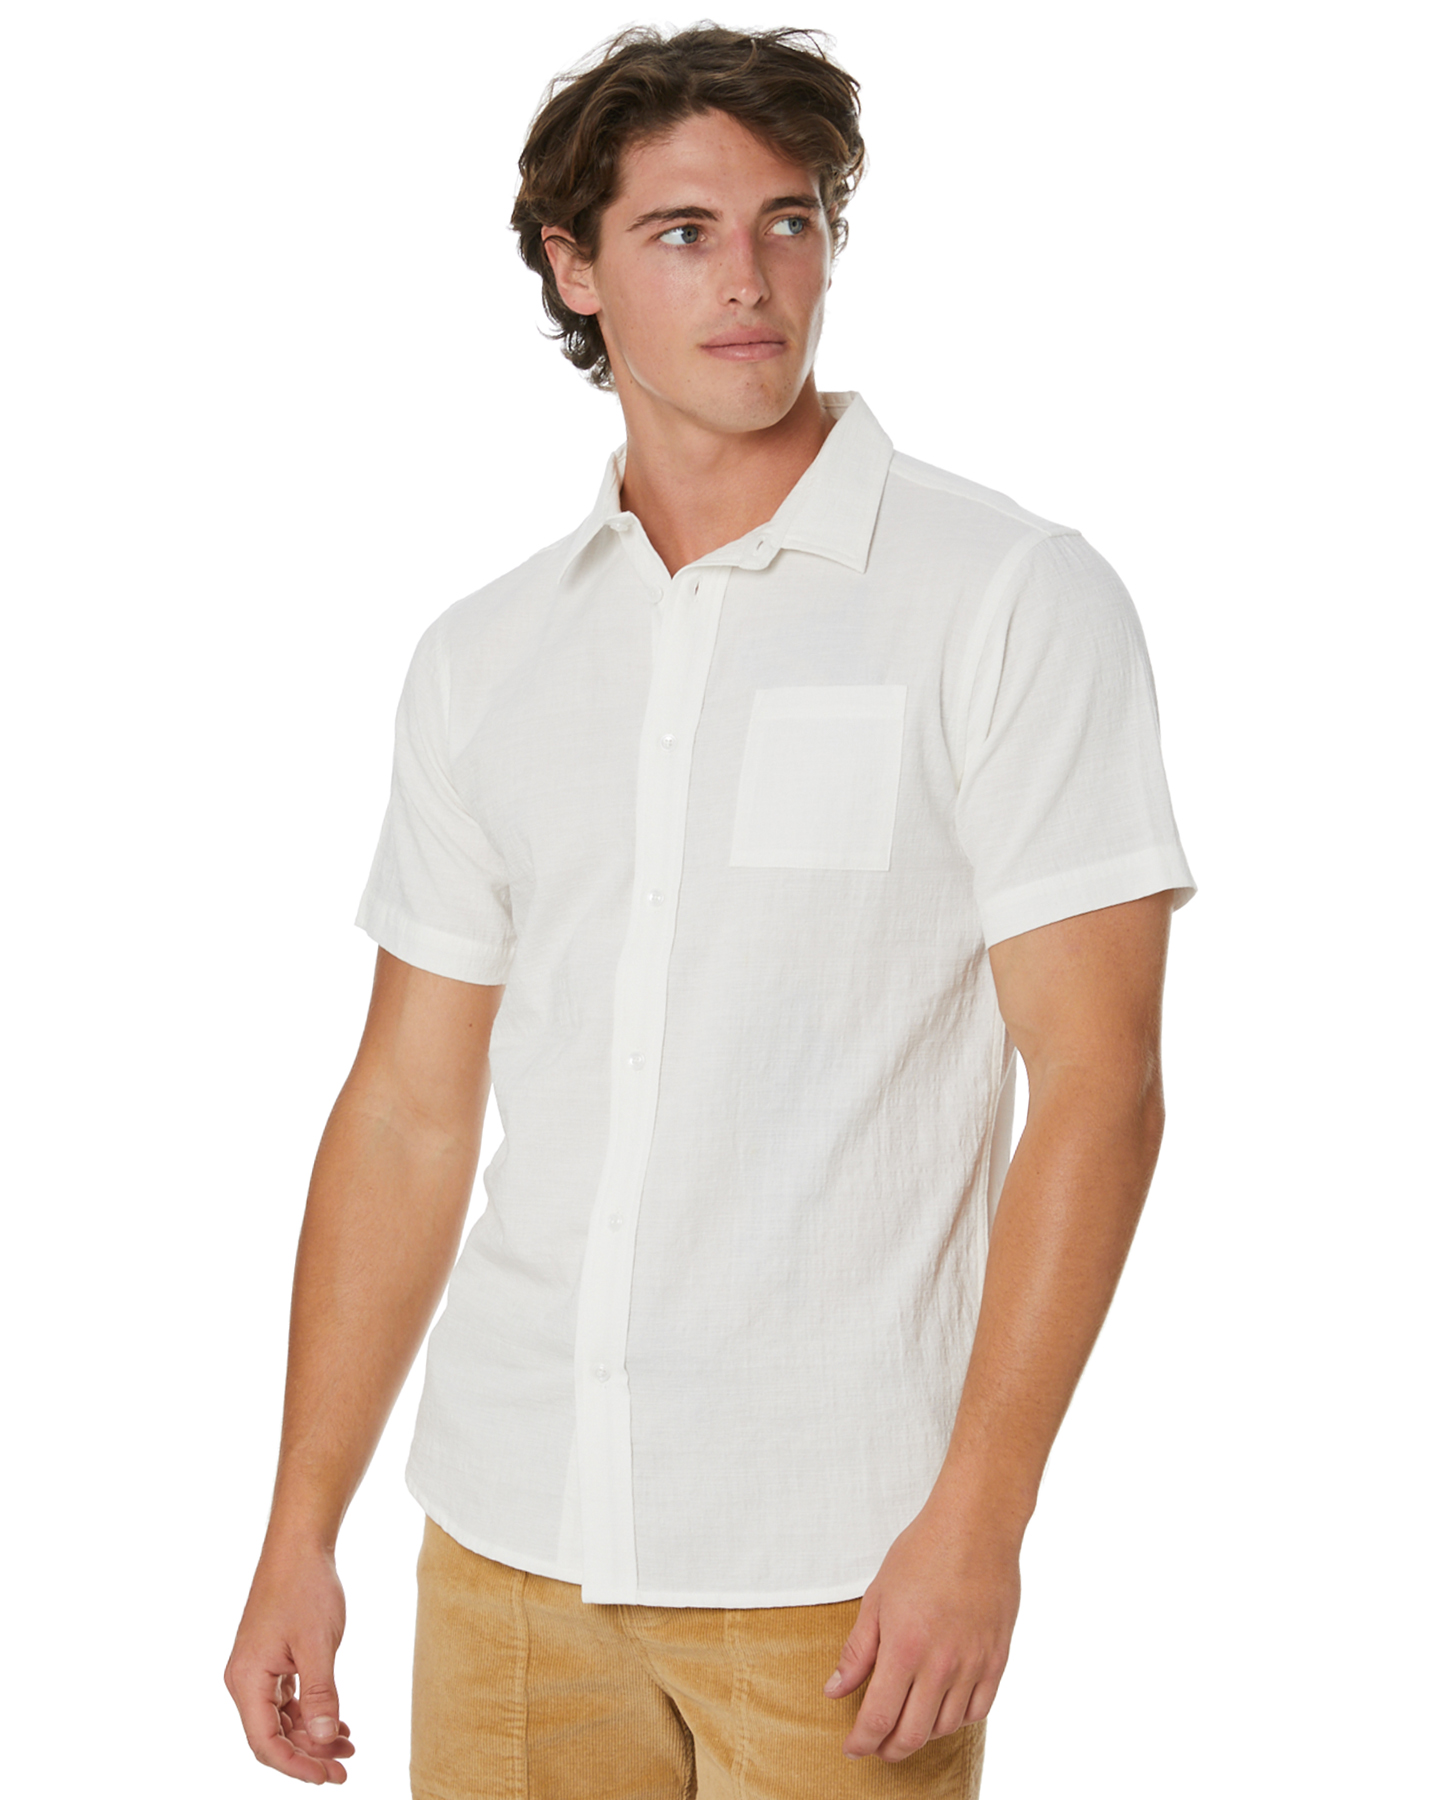 Stay Crushed Mens Ss Woven Shirt - White | SurfStitch